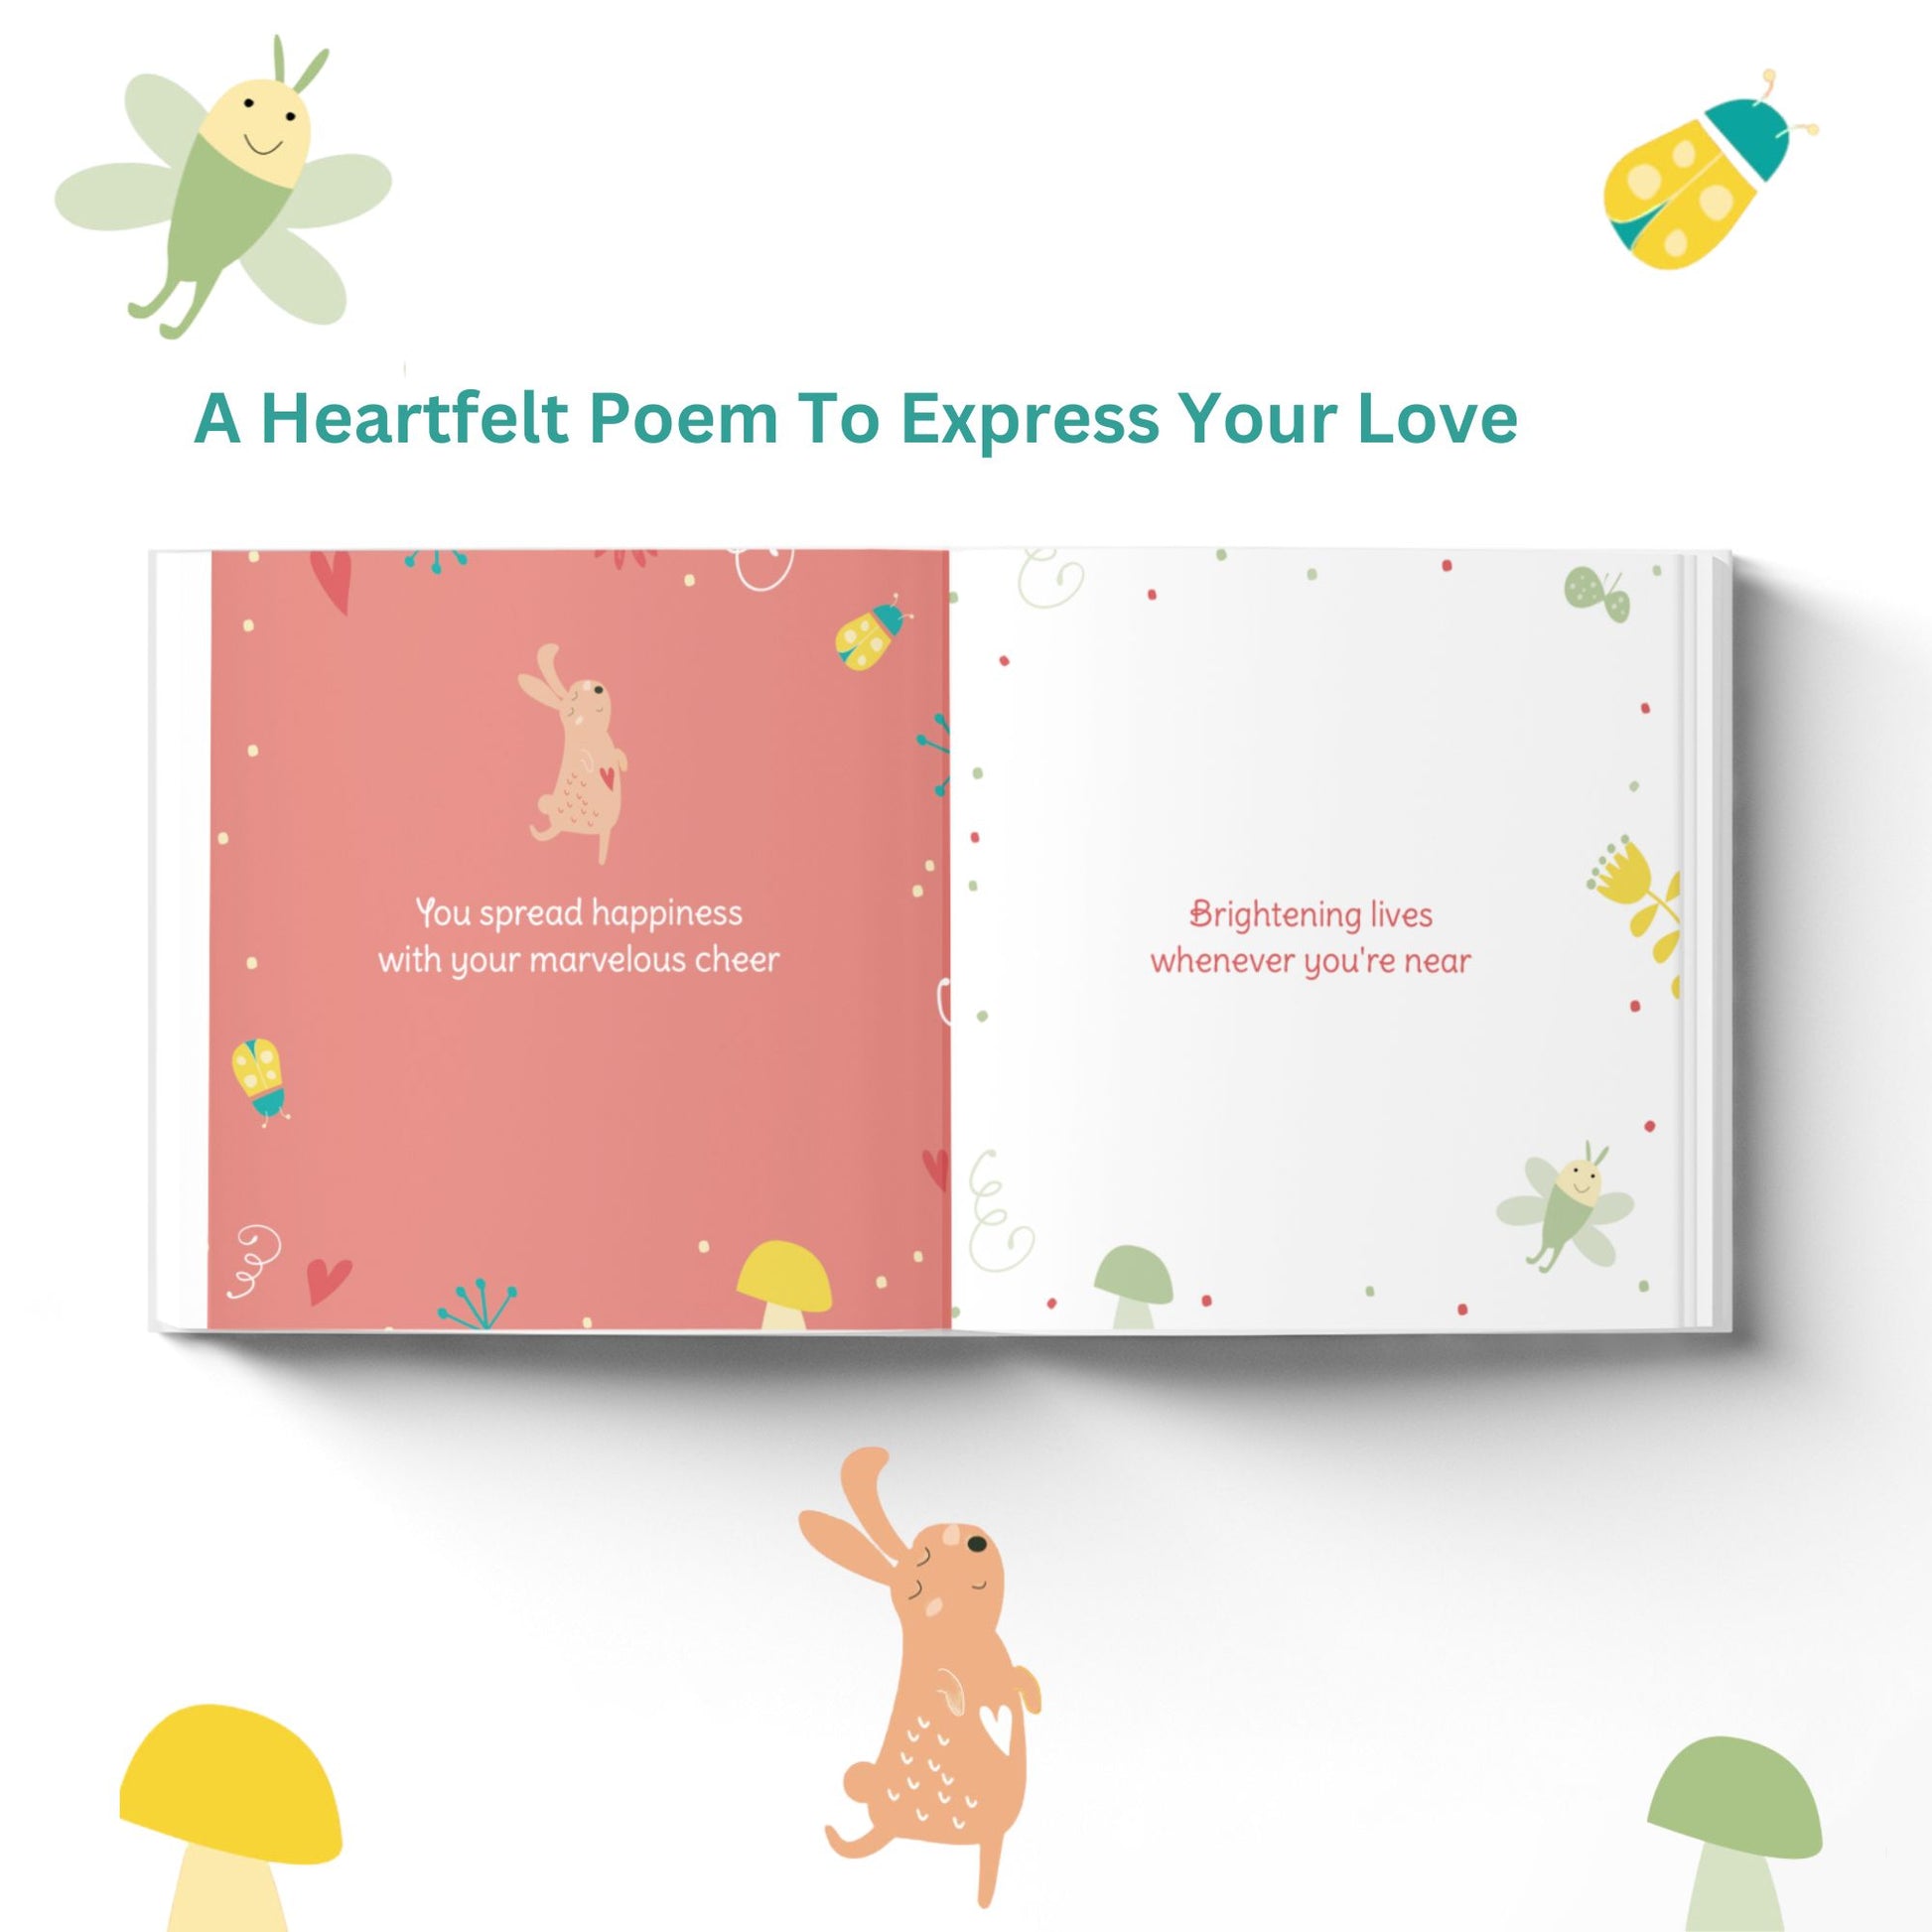 An Anniversary Book Gift to Cherish Forever - Luhvee Books